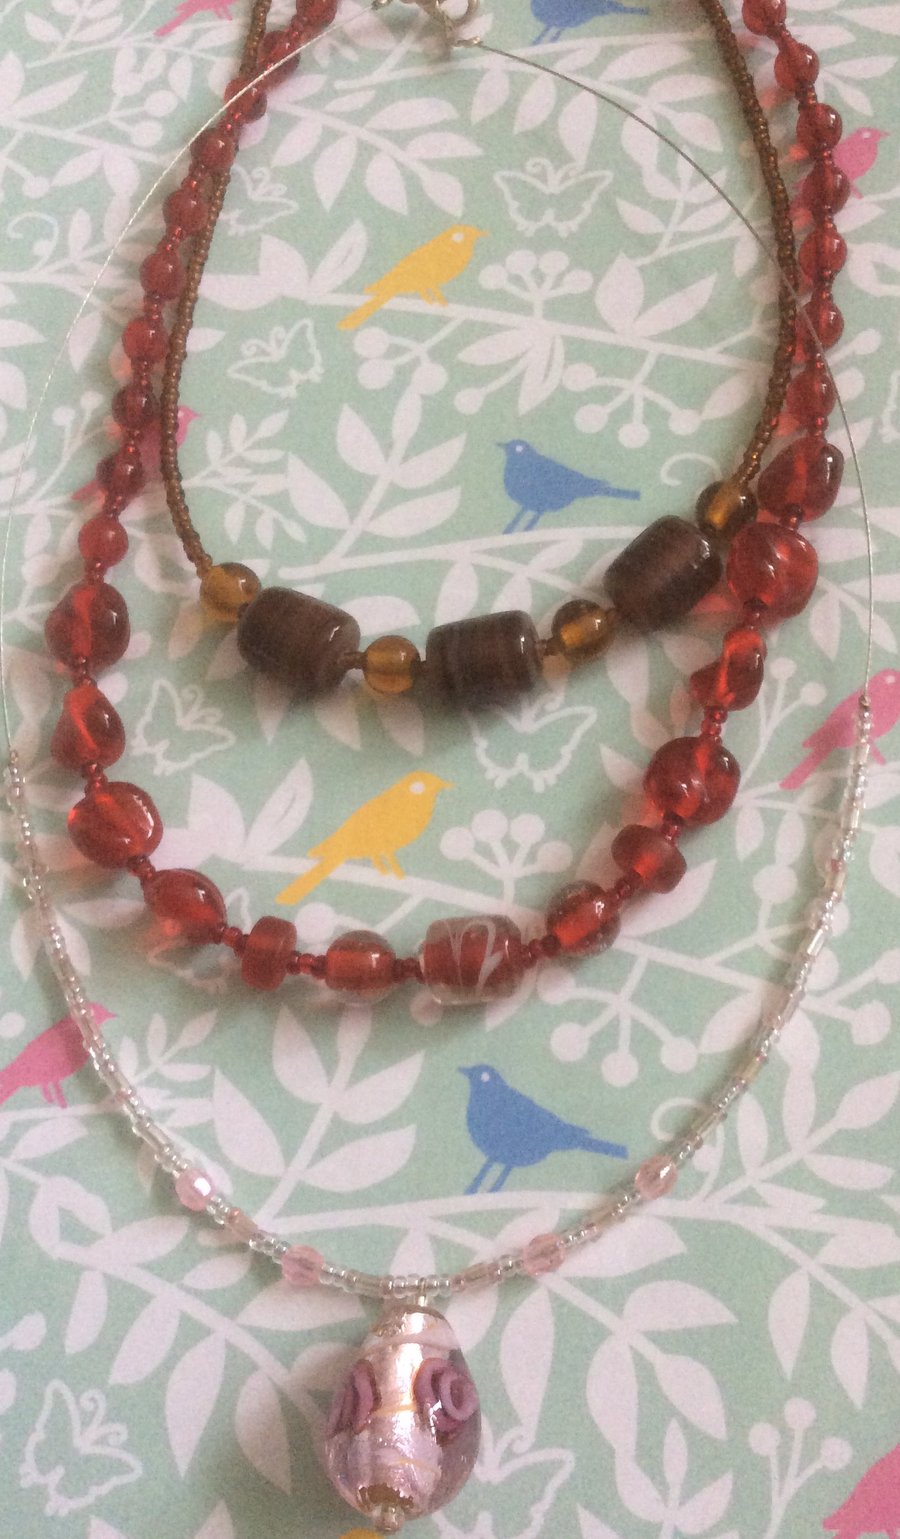 3 Handmade Glass Bead Necklaces, Red, Brown, Pink.